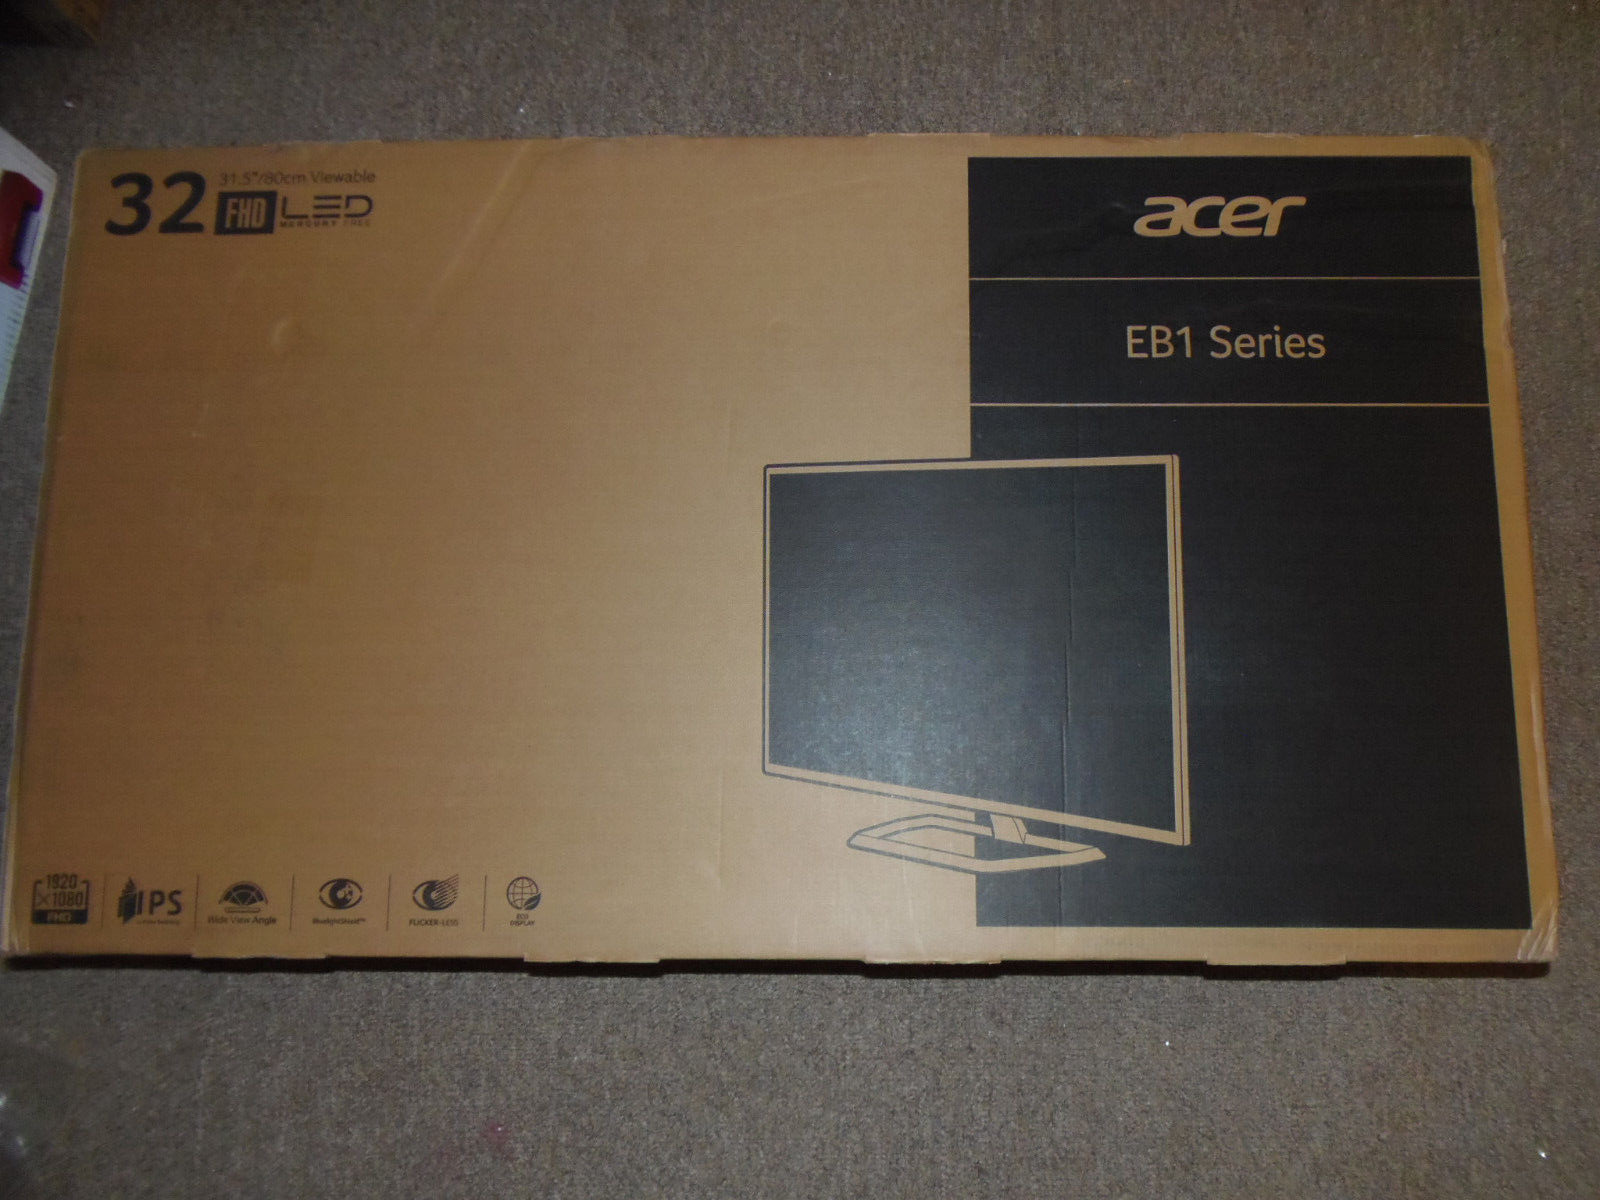 New Sealed Acer EB321HQ 32” Widescreen IPS LCD Monitor EB1 Series - Black